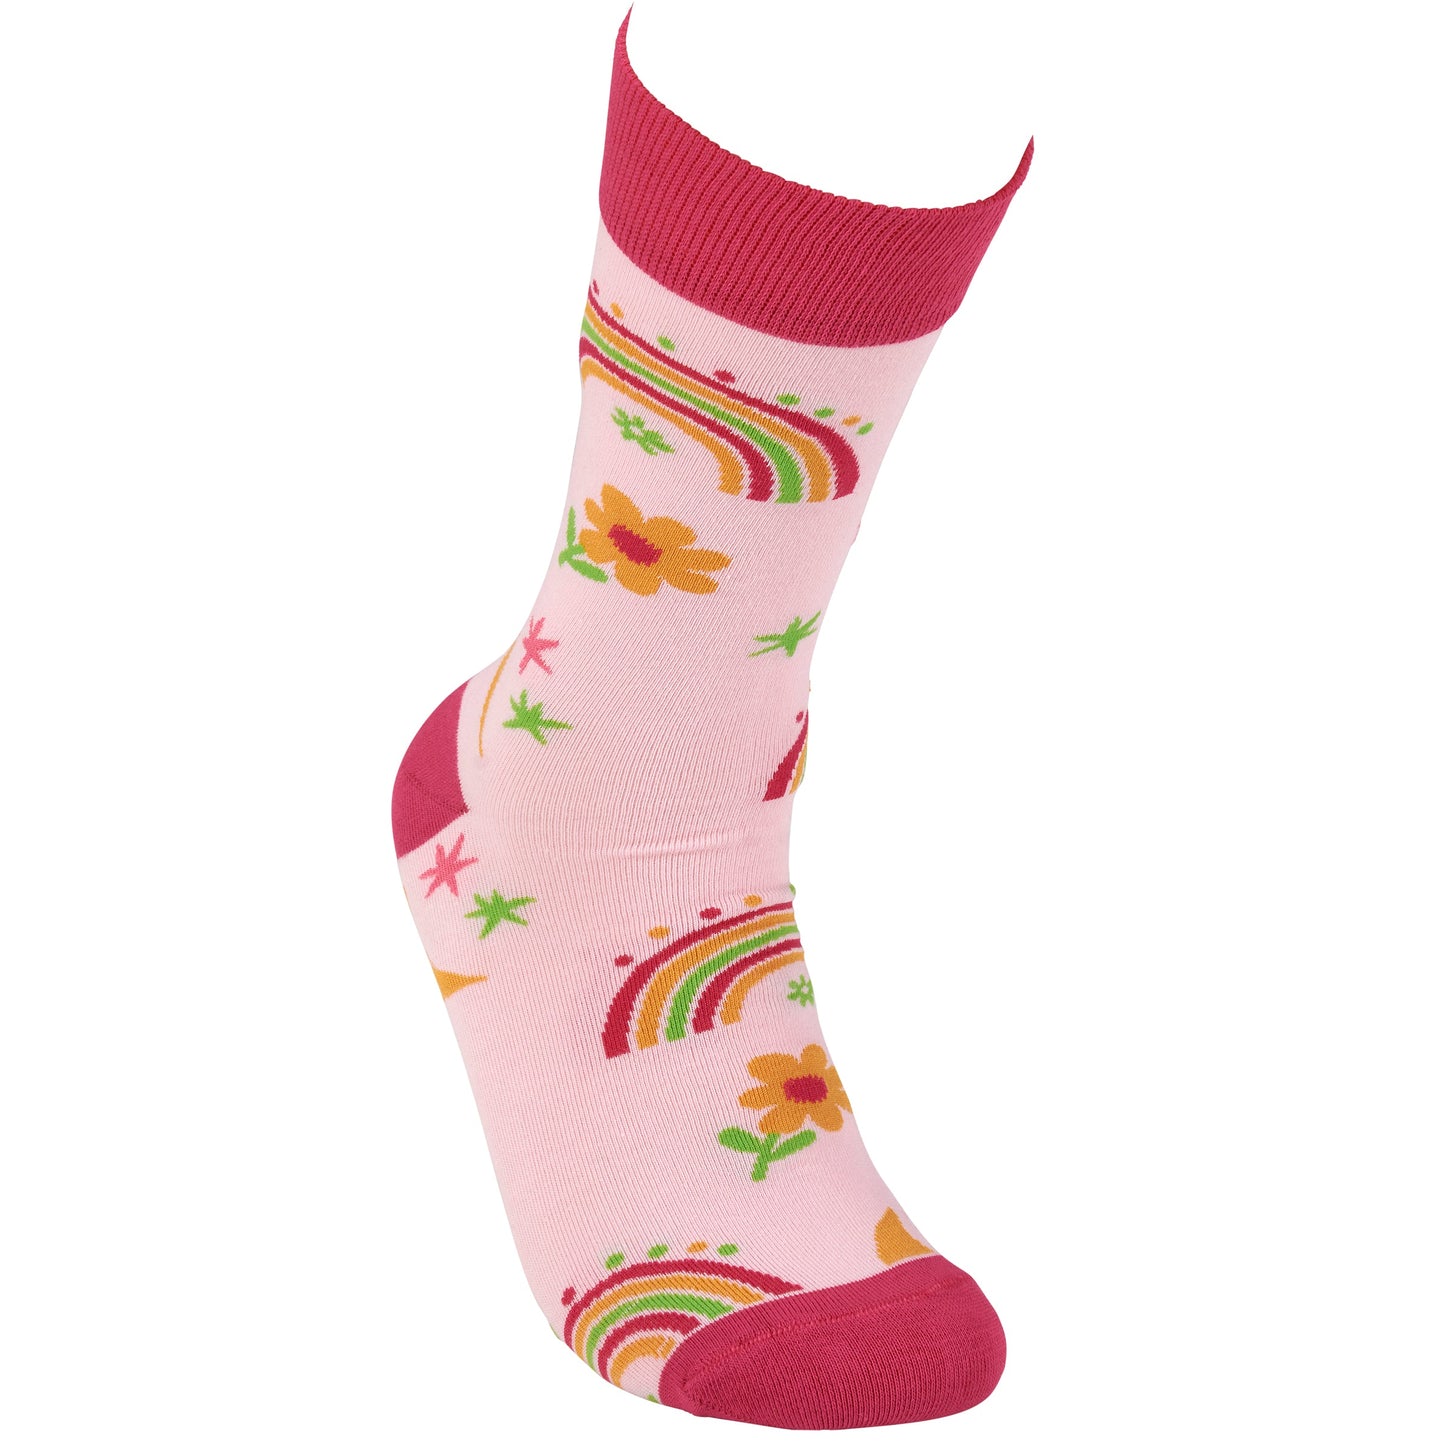 Rainbow and Flowers Socks on Pink Background | Women's Colorful Self-expression Socks